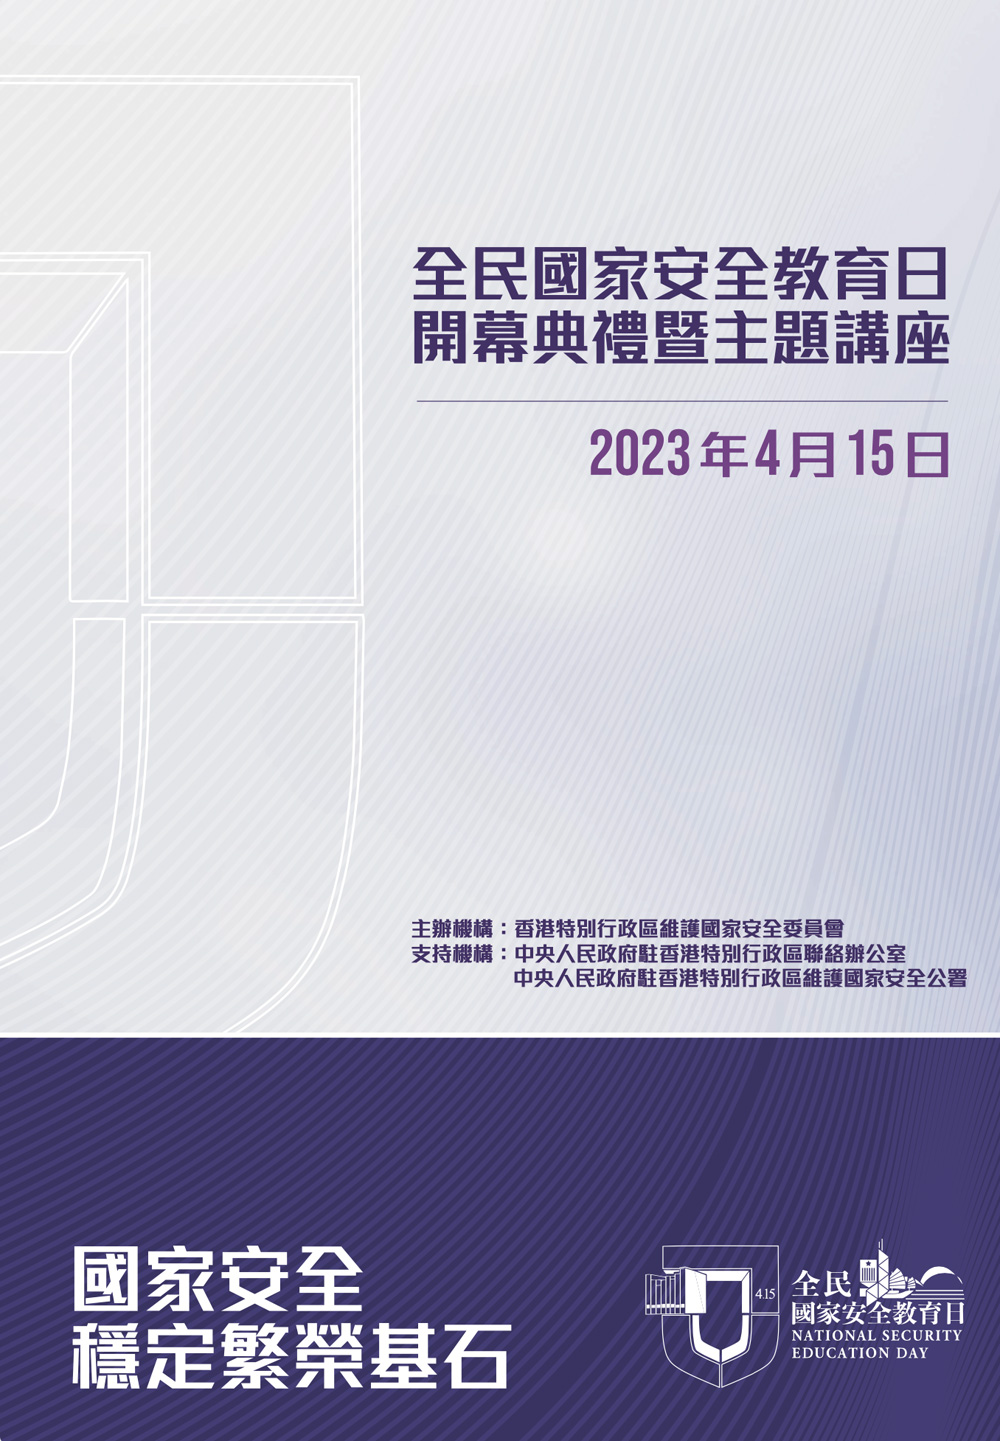 Booklet on the Opening Ceremony cum Seminar 2023 (Chinese only)